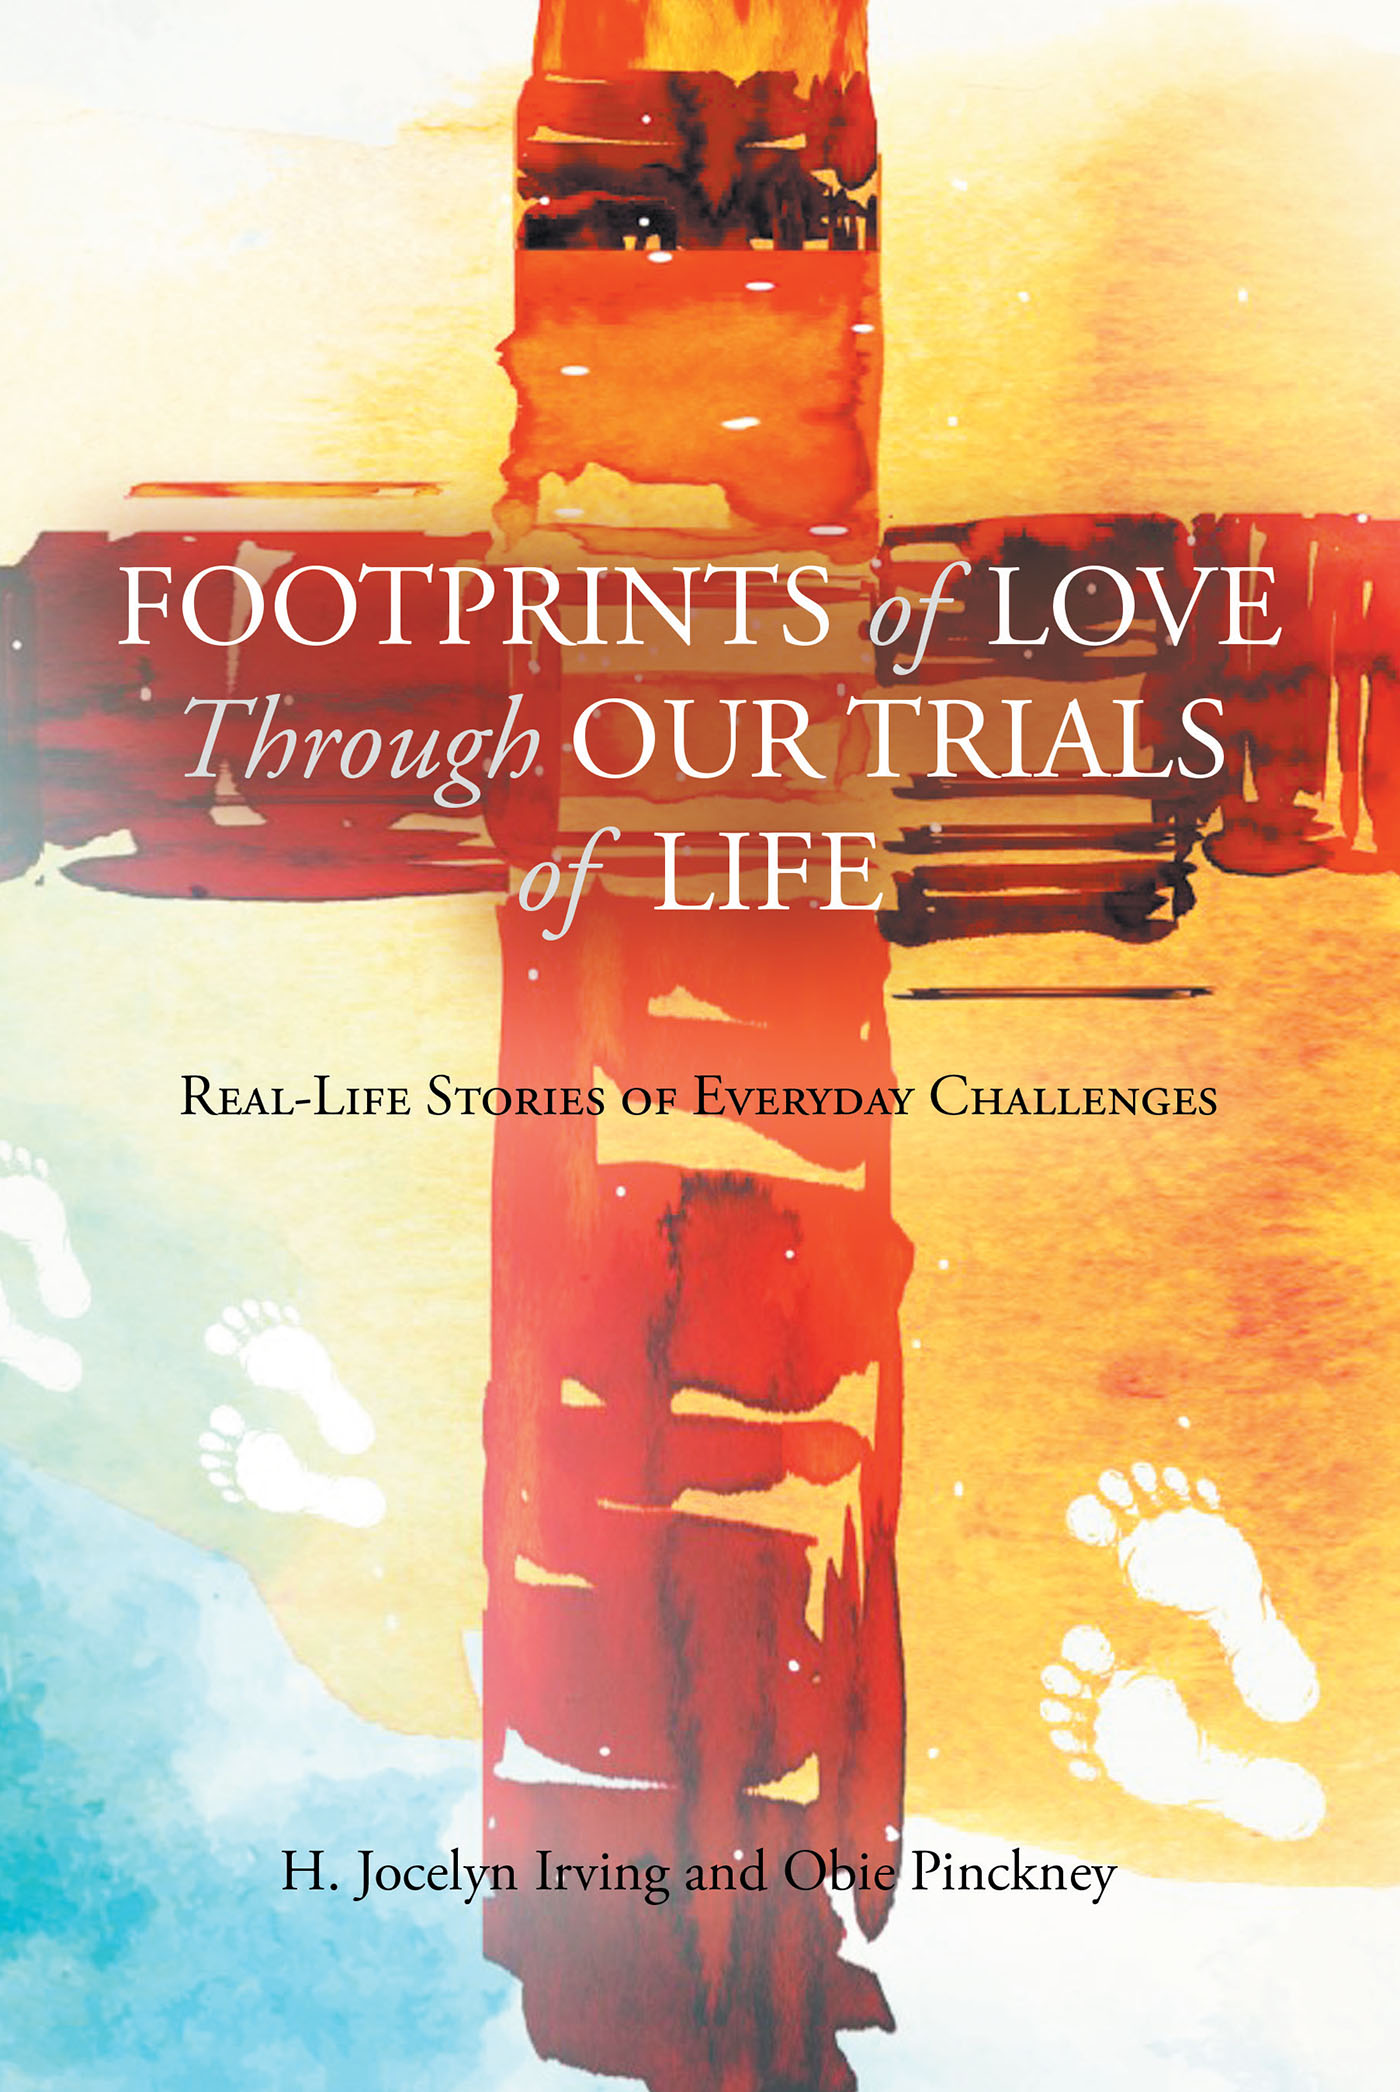 Authors H. Jocelyn Irving and Obie Pinckney’s New Book, “Footprints of Love Through Our Trials of Life: Real-Life Stories of Everyday Challenges,” is a Spiritual Work